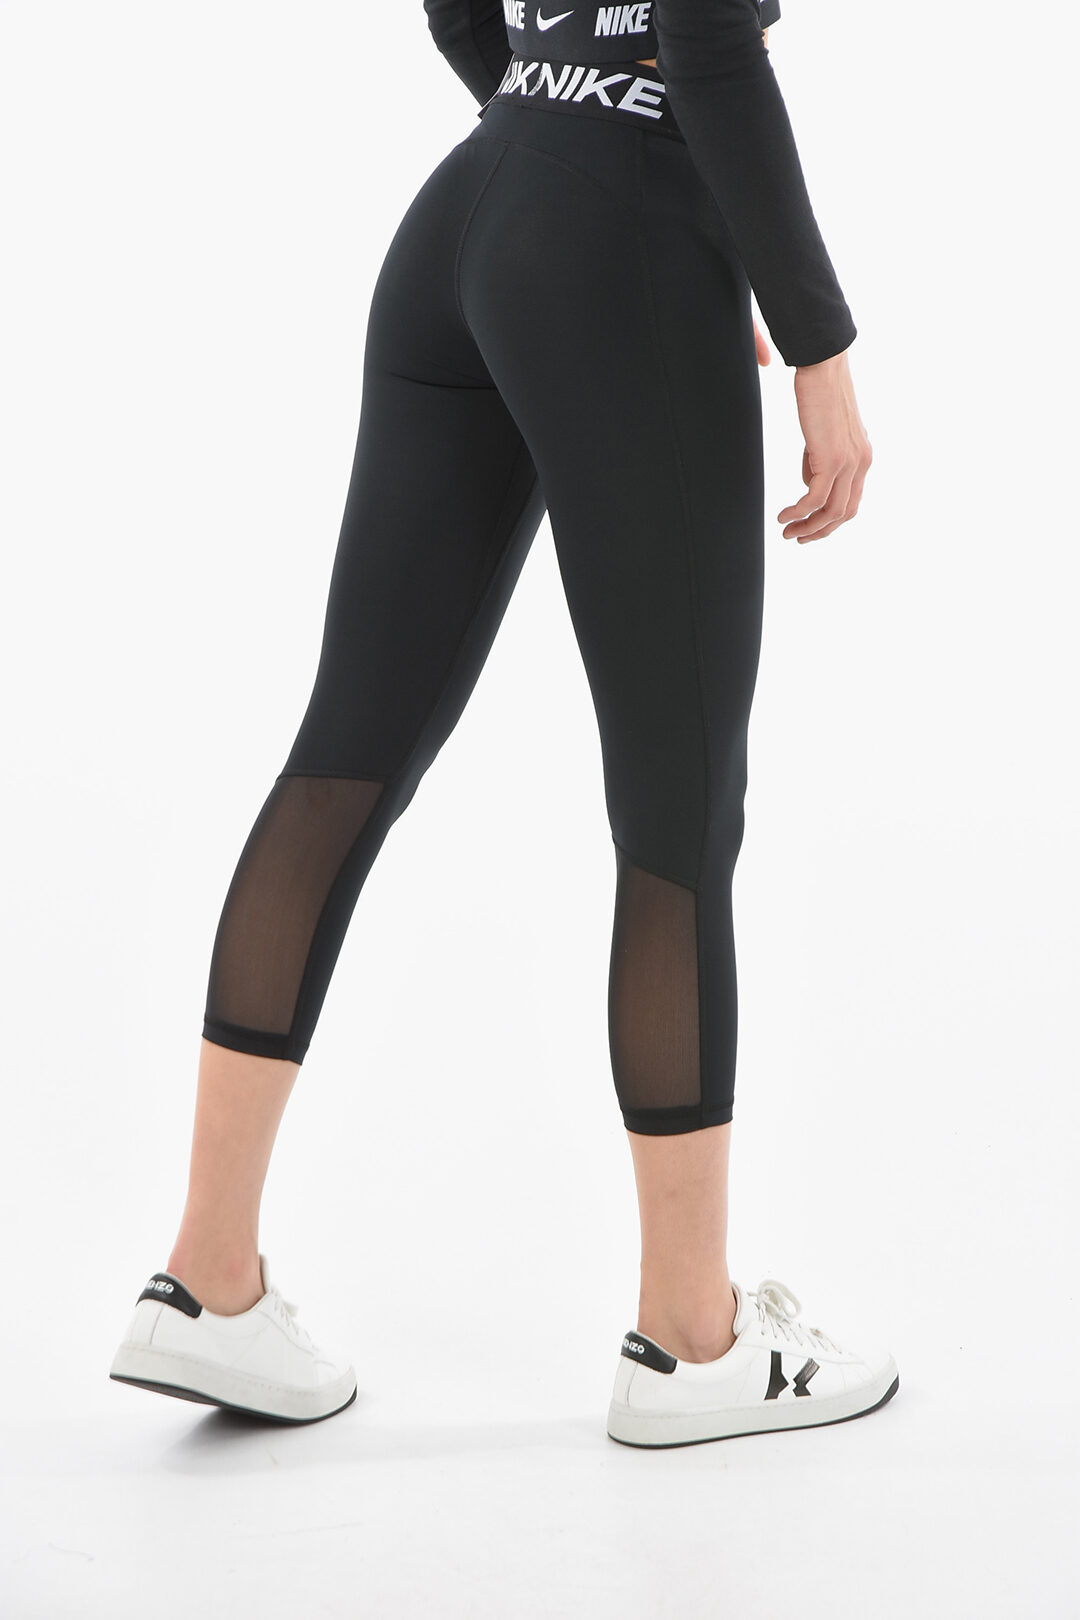 PRO Logoed At the Waist DR-FIT Leggings women - Glamood Outlet